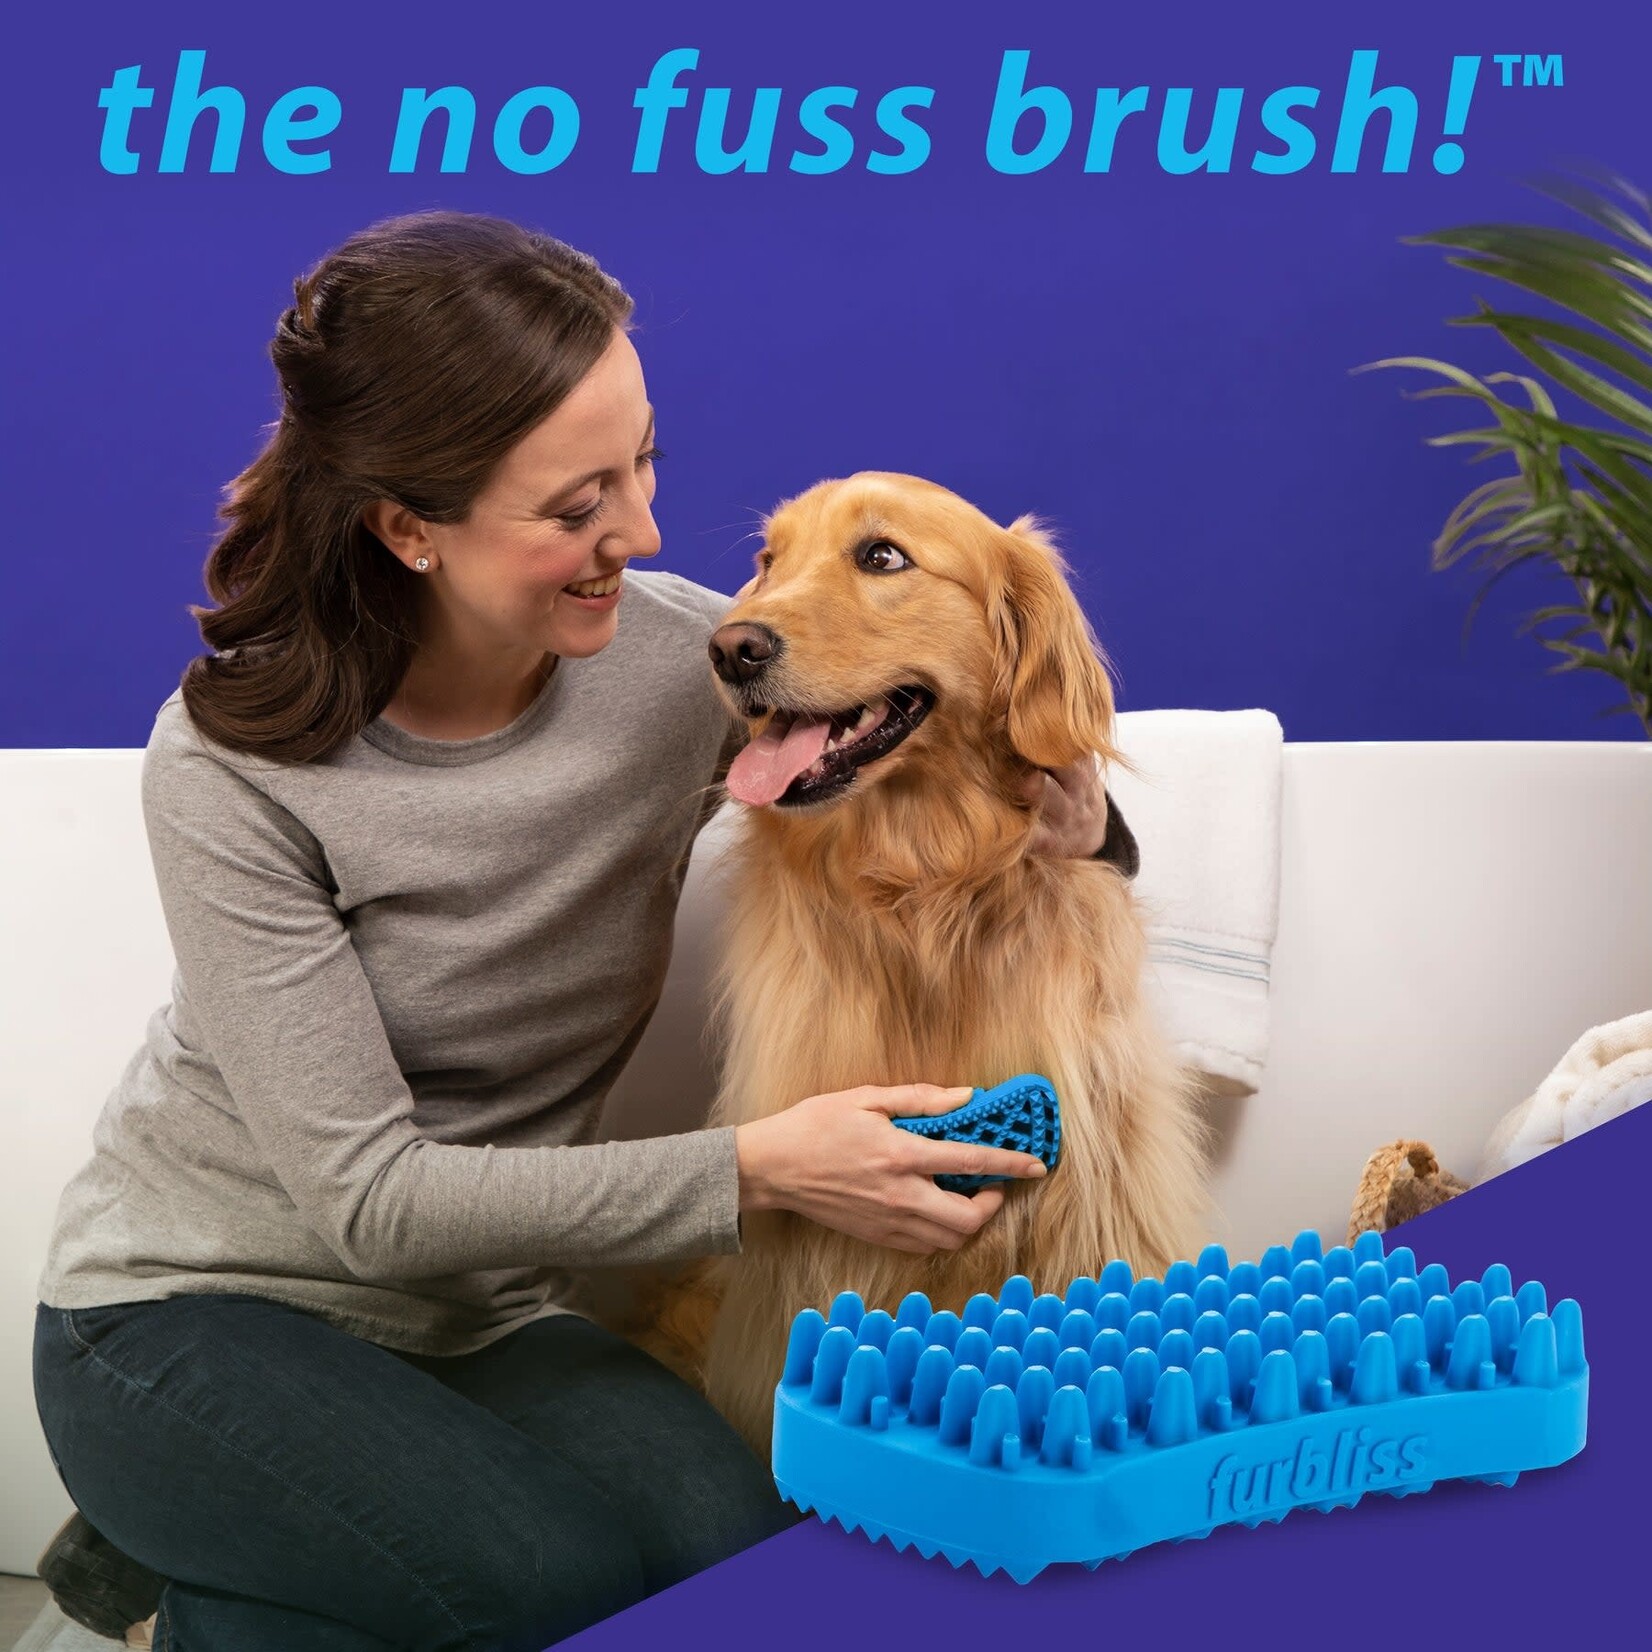 Furbliss Brush for Pets with Short Hair